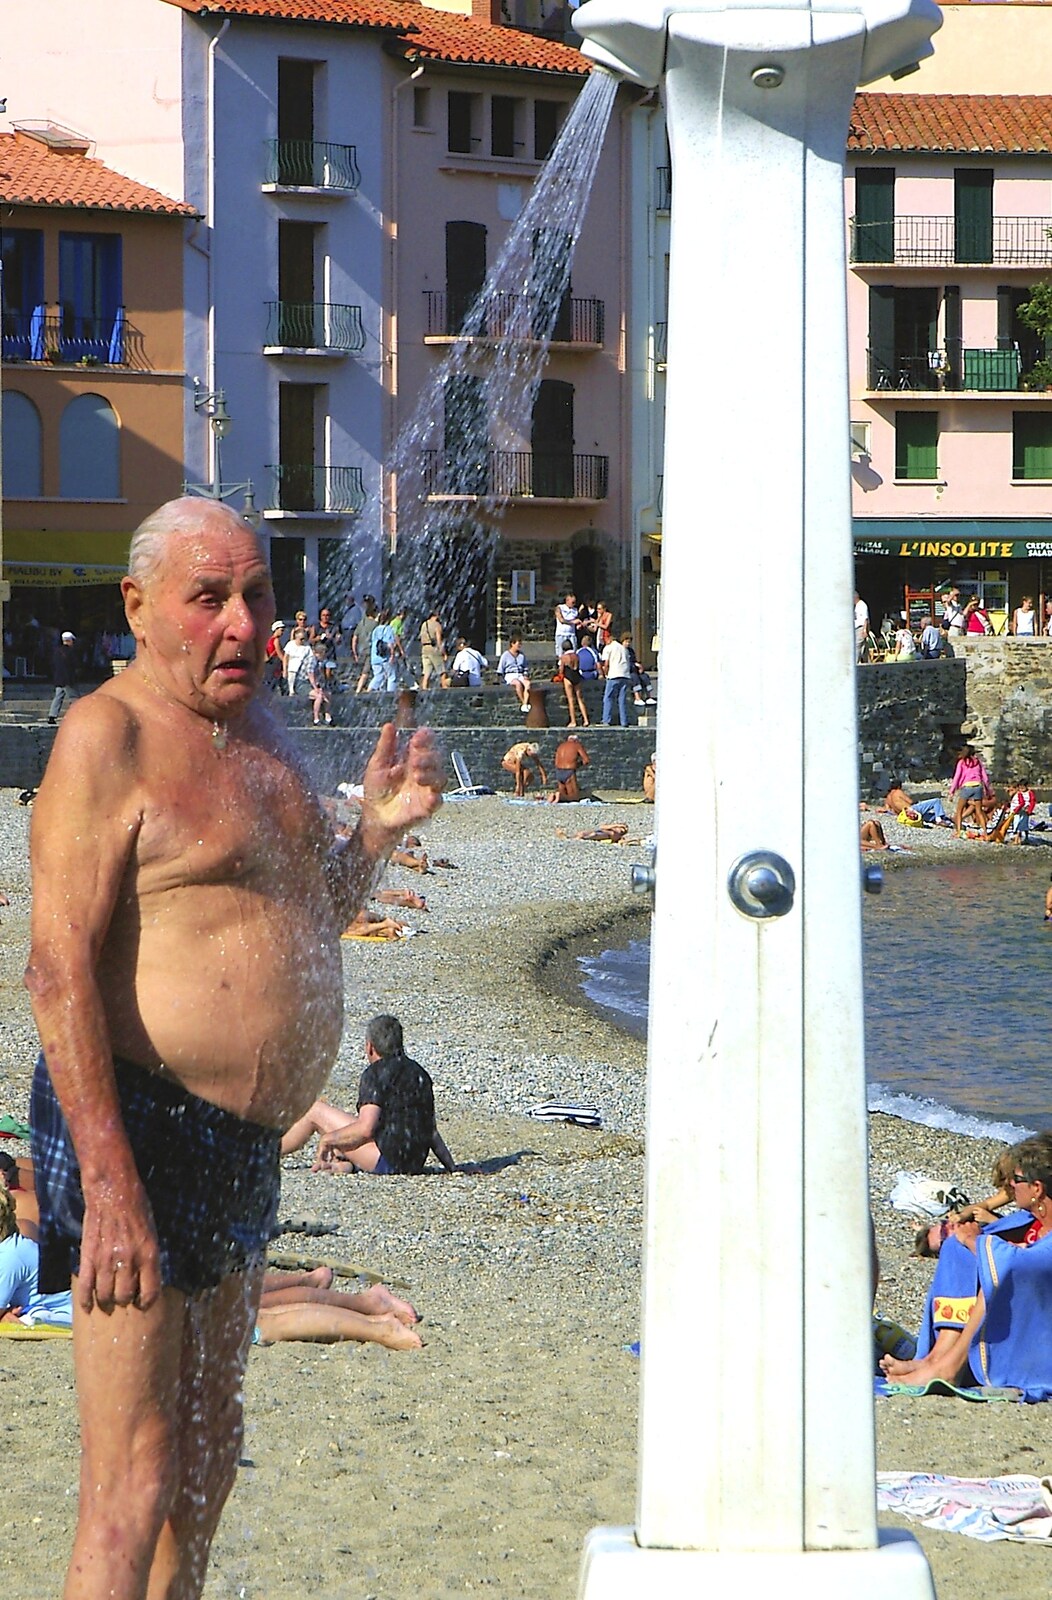 A geezer with moobs takes a shower on the beach from The Colourful Boats of Collioure, France - 20th September 2006